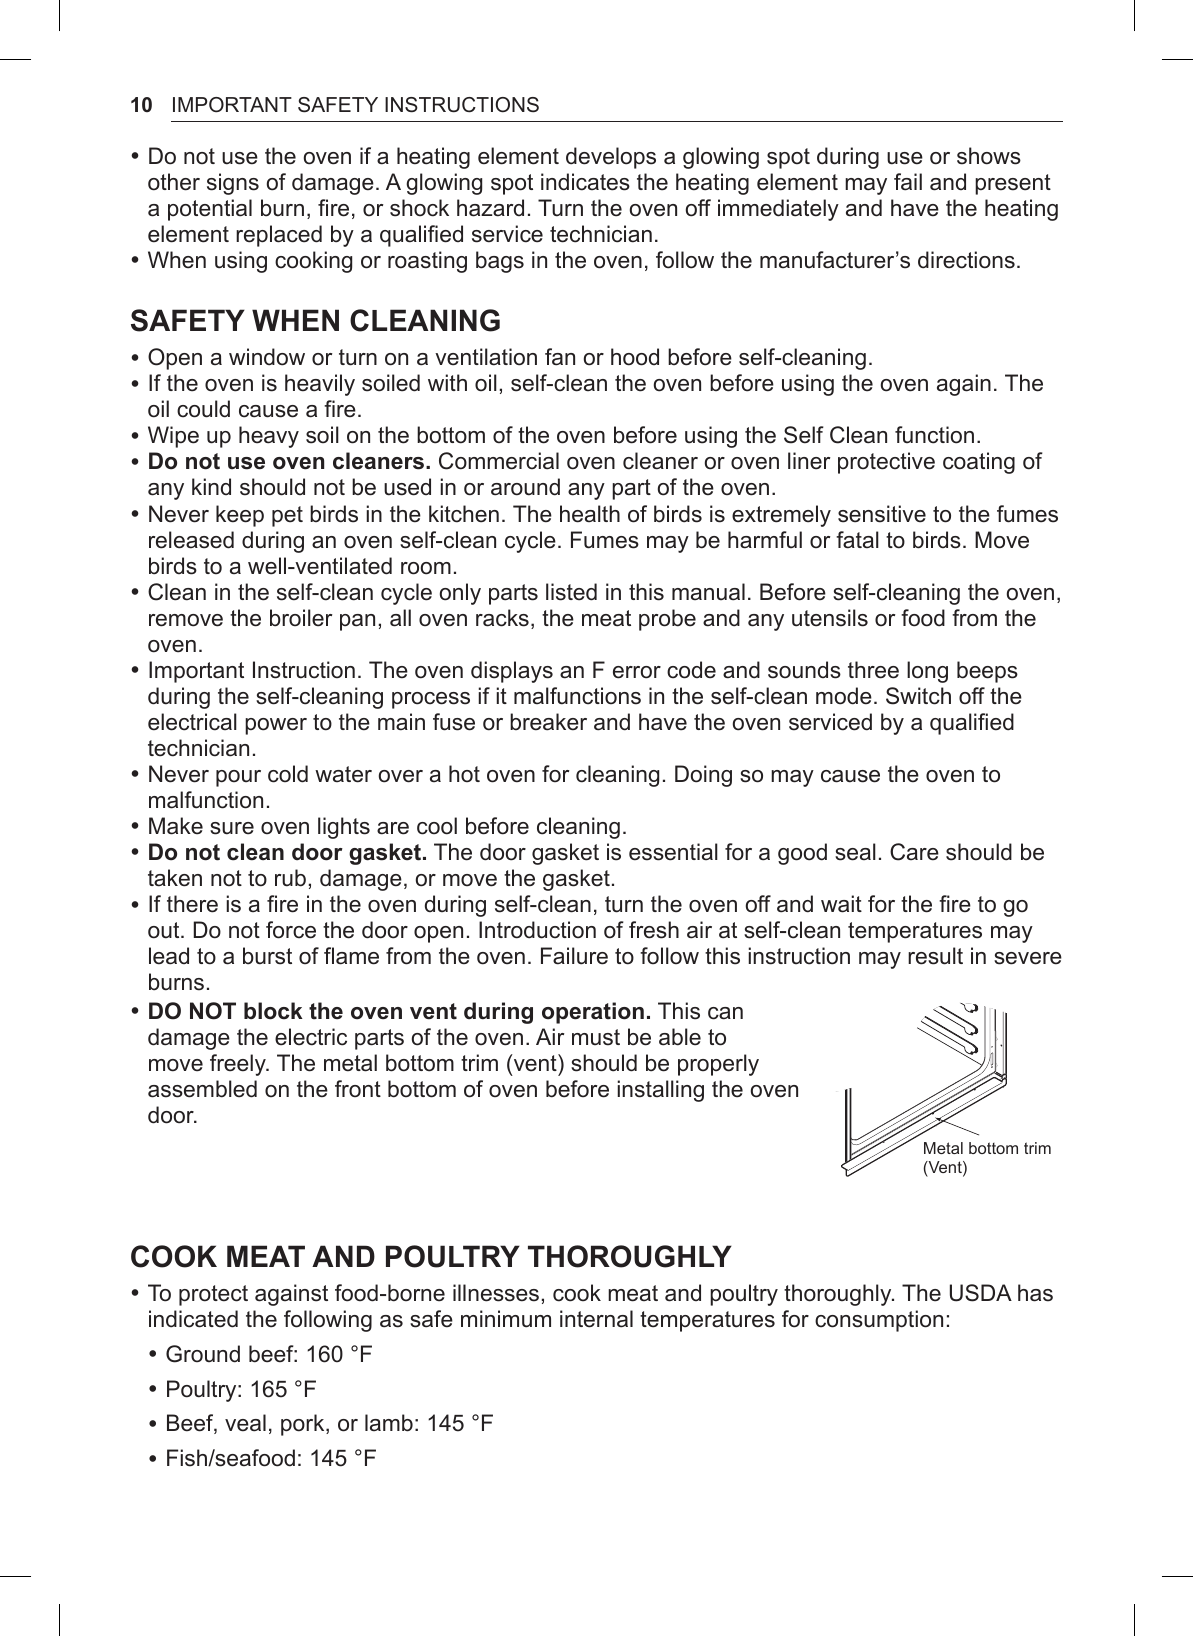 10 IMPORTANT SAFETY INSTRUCTIONS •Do not use the oven if a heating element develops a glowing spot during use or shows other signs of damage. A glowing spot indicates the heating element may fail and present a potential burn, fire, or shock hazard. Turn the oven off immediately and have the heating element replaced by a qualified service technician. •When using cooking or roasting bags in the oven, follow the manufacturer’s directions.SAFETY WHEN CLEANING •Open a window or turn on a ventilation fan or hood before self-cleaning. •If the oven is heavily soiled with oil, self-clean the oven before using the oven again. The oil could cause a fire. •Wipe up heavy soil on the bottom of the oven before using the Self Clean function. •Do not use oven cleaners. Commercial oven cleaner or oven liner protective coating of any kind should not be used in or around any part of the oven. •Never keep pet birds in the kitchen. The health of birds is extremely sensitive to the fumes released during an oven self-clean cycle. Fumes may be harmful or fatal to birds. Move birds to a well-ventilated room. •Clean in the self-clean cycle only parts listed in this manual. Before self-cleaning the oven, remove the broiler pan, all oven racks, the meat probe and any utensils or food from the oven. •Important Instruction. The oven displays an F error code and sounds three long beeps during the self-cleaning process if it malfunctions in the self-clean mode. Switch off the electrical power to the main fuse or breaker and have the oven serviced by a qualified technician. •Never pour cold water over a hot oven for cleaning. Doing so may cause the oven to malfunction. •Make sure oven lights are cool before cleaning. •Do not clean door gasket. The door gasket is essential for a good seal. Care should be taken not to rub, damage, or move the gasket. •If there is a fire in the oven during self-clean, turn the oven off and wait for the fire to go out. Do not force the door open. Introduction of fresh air at self-clean temperatures may lead to a burst of flame from the oven. Failure to follow this instruction may result in severe burns. •DO NOT block the oven vent during operation. This can damage the electric parts of the oven. Air must be able to move freely. The metal bottom trim (vent) should be properly assembled on the front bottom of oven before installing the oven door.Metal bottom trim (Vent)COOK MEAT AND POULTRY THOROUGHLY •To protect against food-borne illnesses, cook meat and poultry thoroughly. The USDA has indicated the following as safe minimum internal temperatures for consumption: •Ground beef: 160 °F •Poultry: 165 °F •Beef, veal, pork, or lamb: 145 °F •Fish/seafood: 145 °F